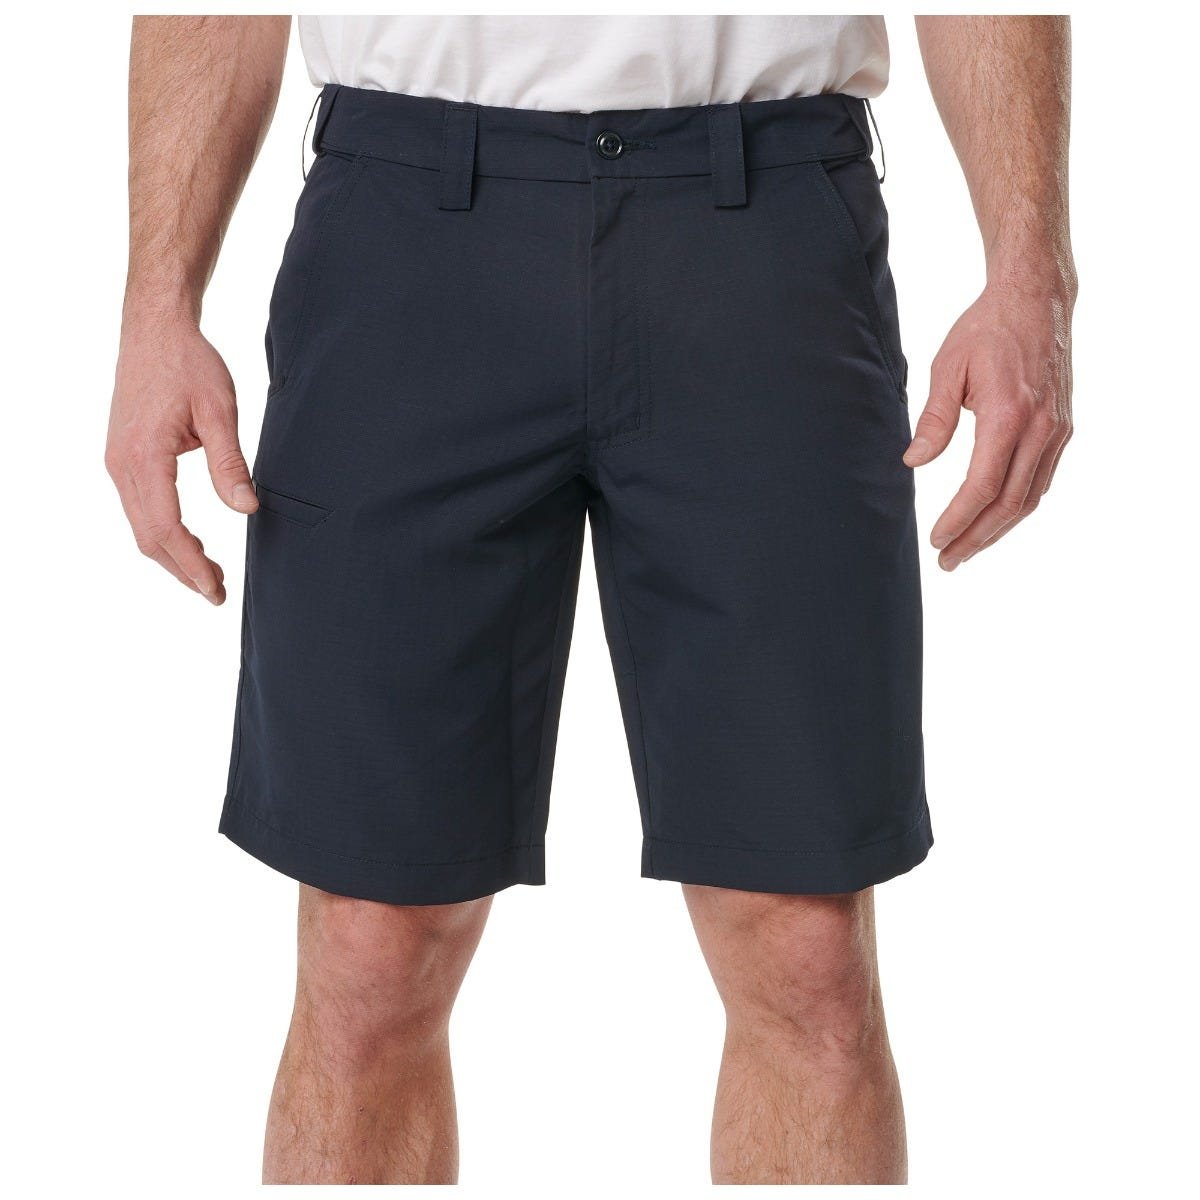 5.11 Tactical Men's Fast-Tac Urban Short, CCW Ready, Polyester, Style ...